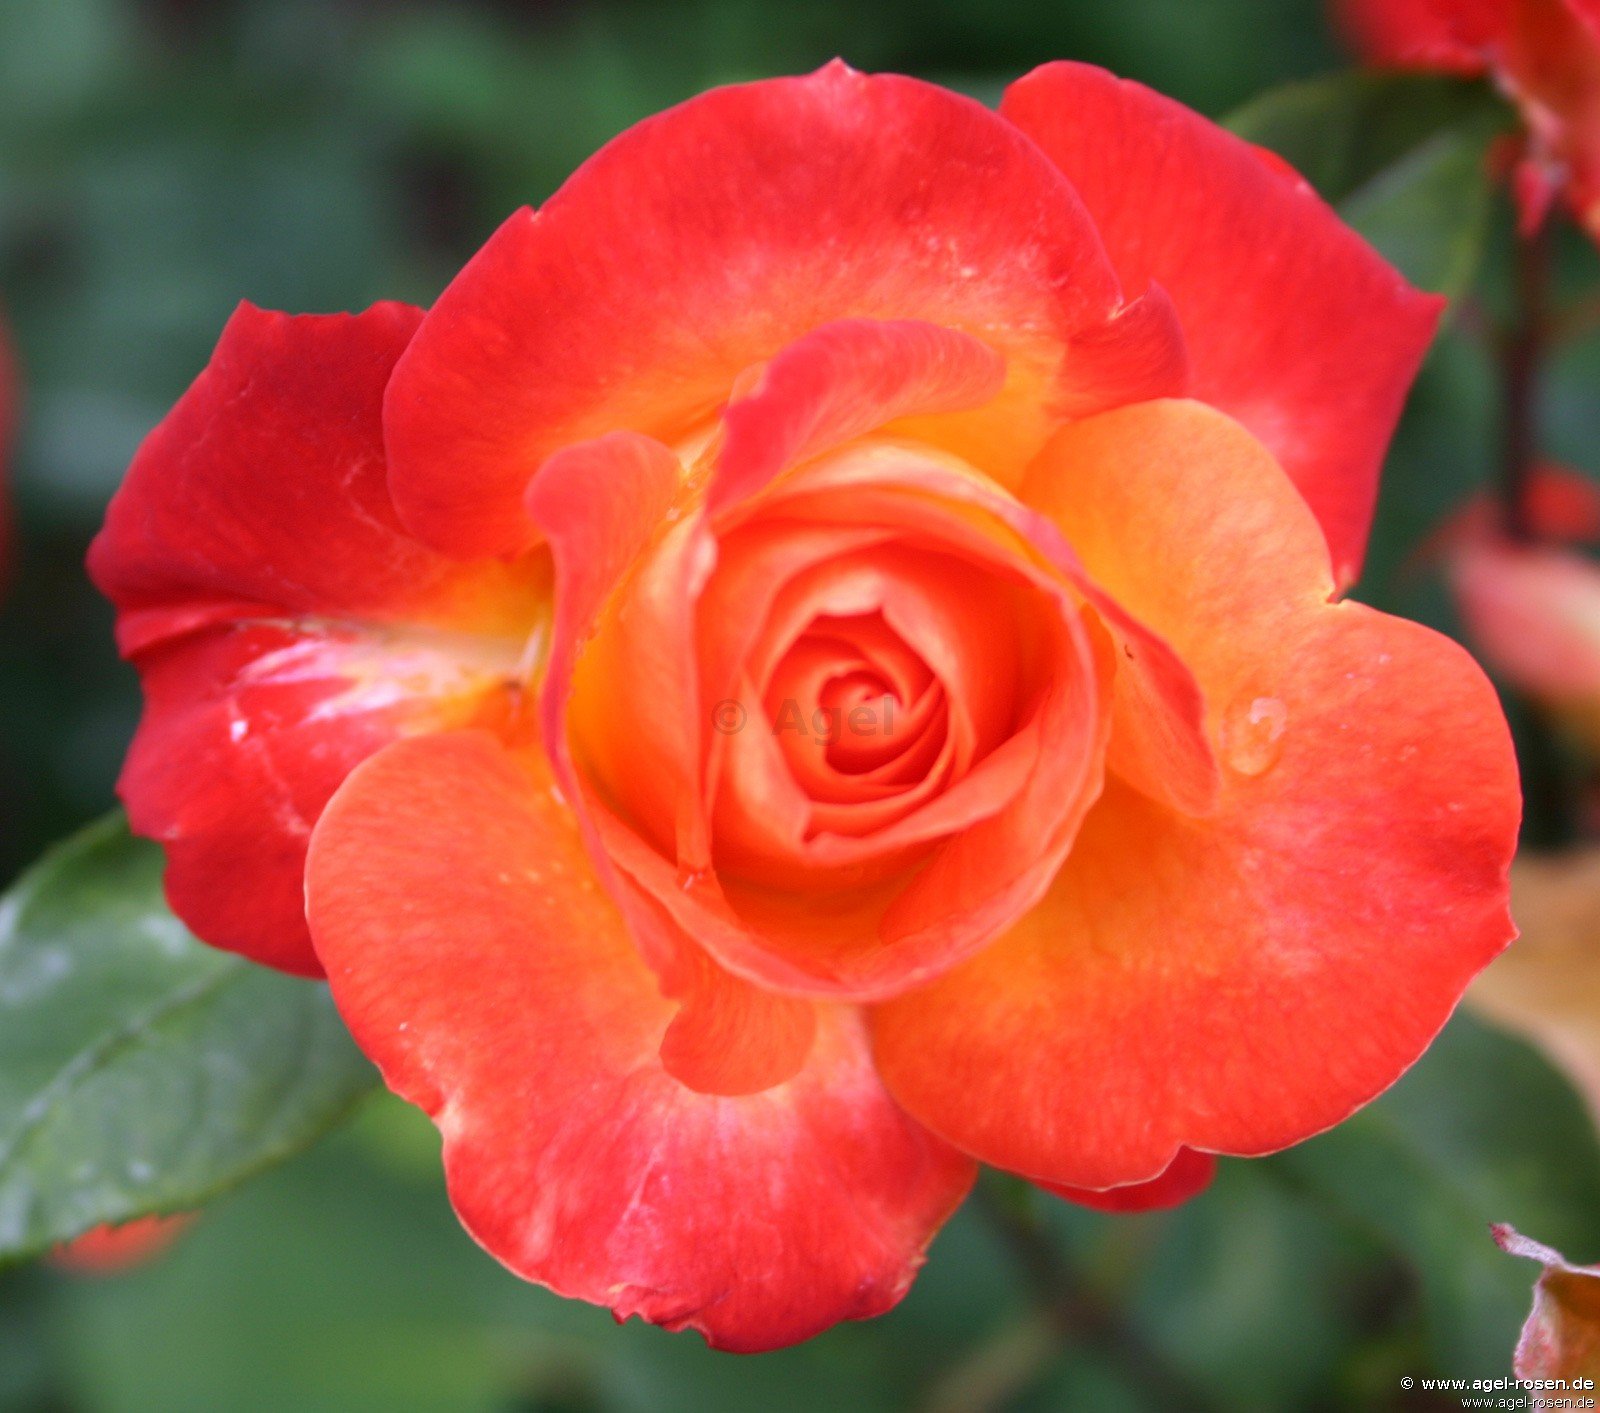 Rose ‘Pigalle‘ (wurzelnackte Rose)